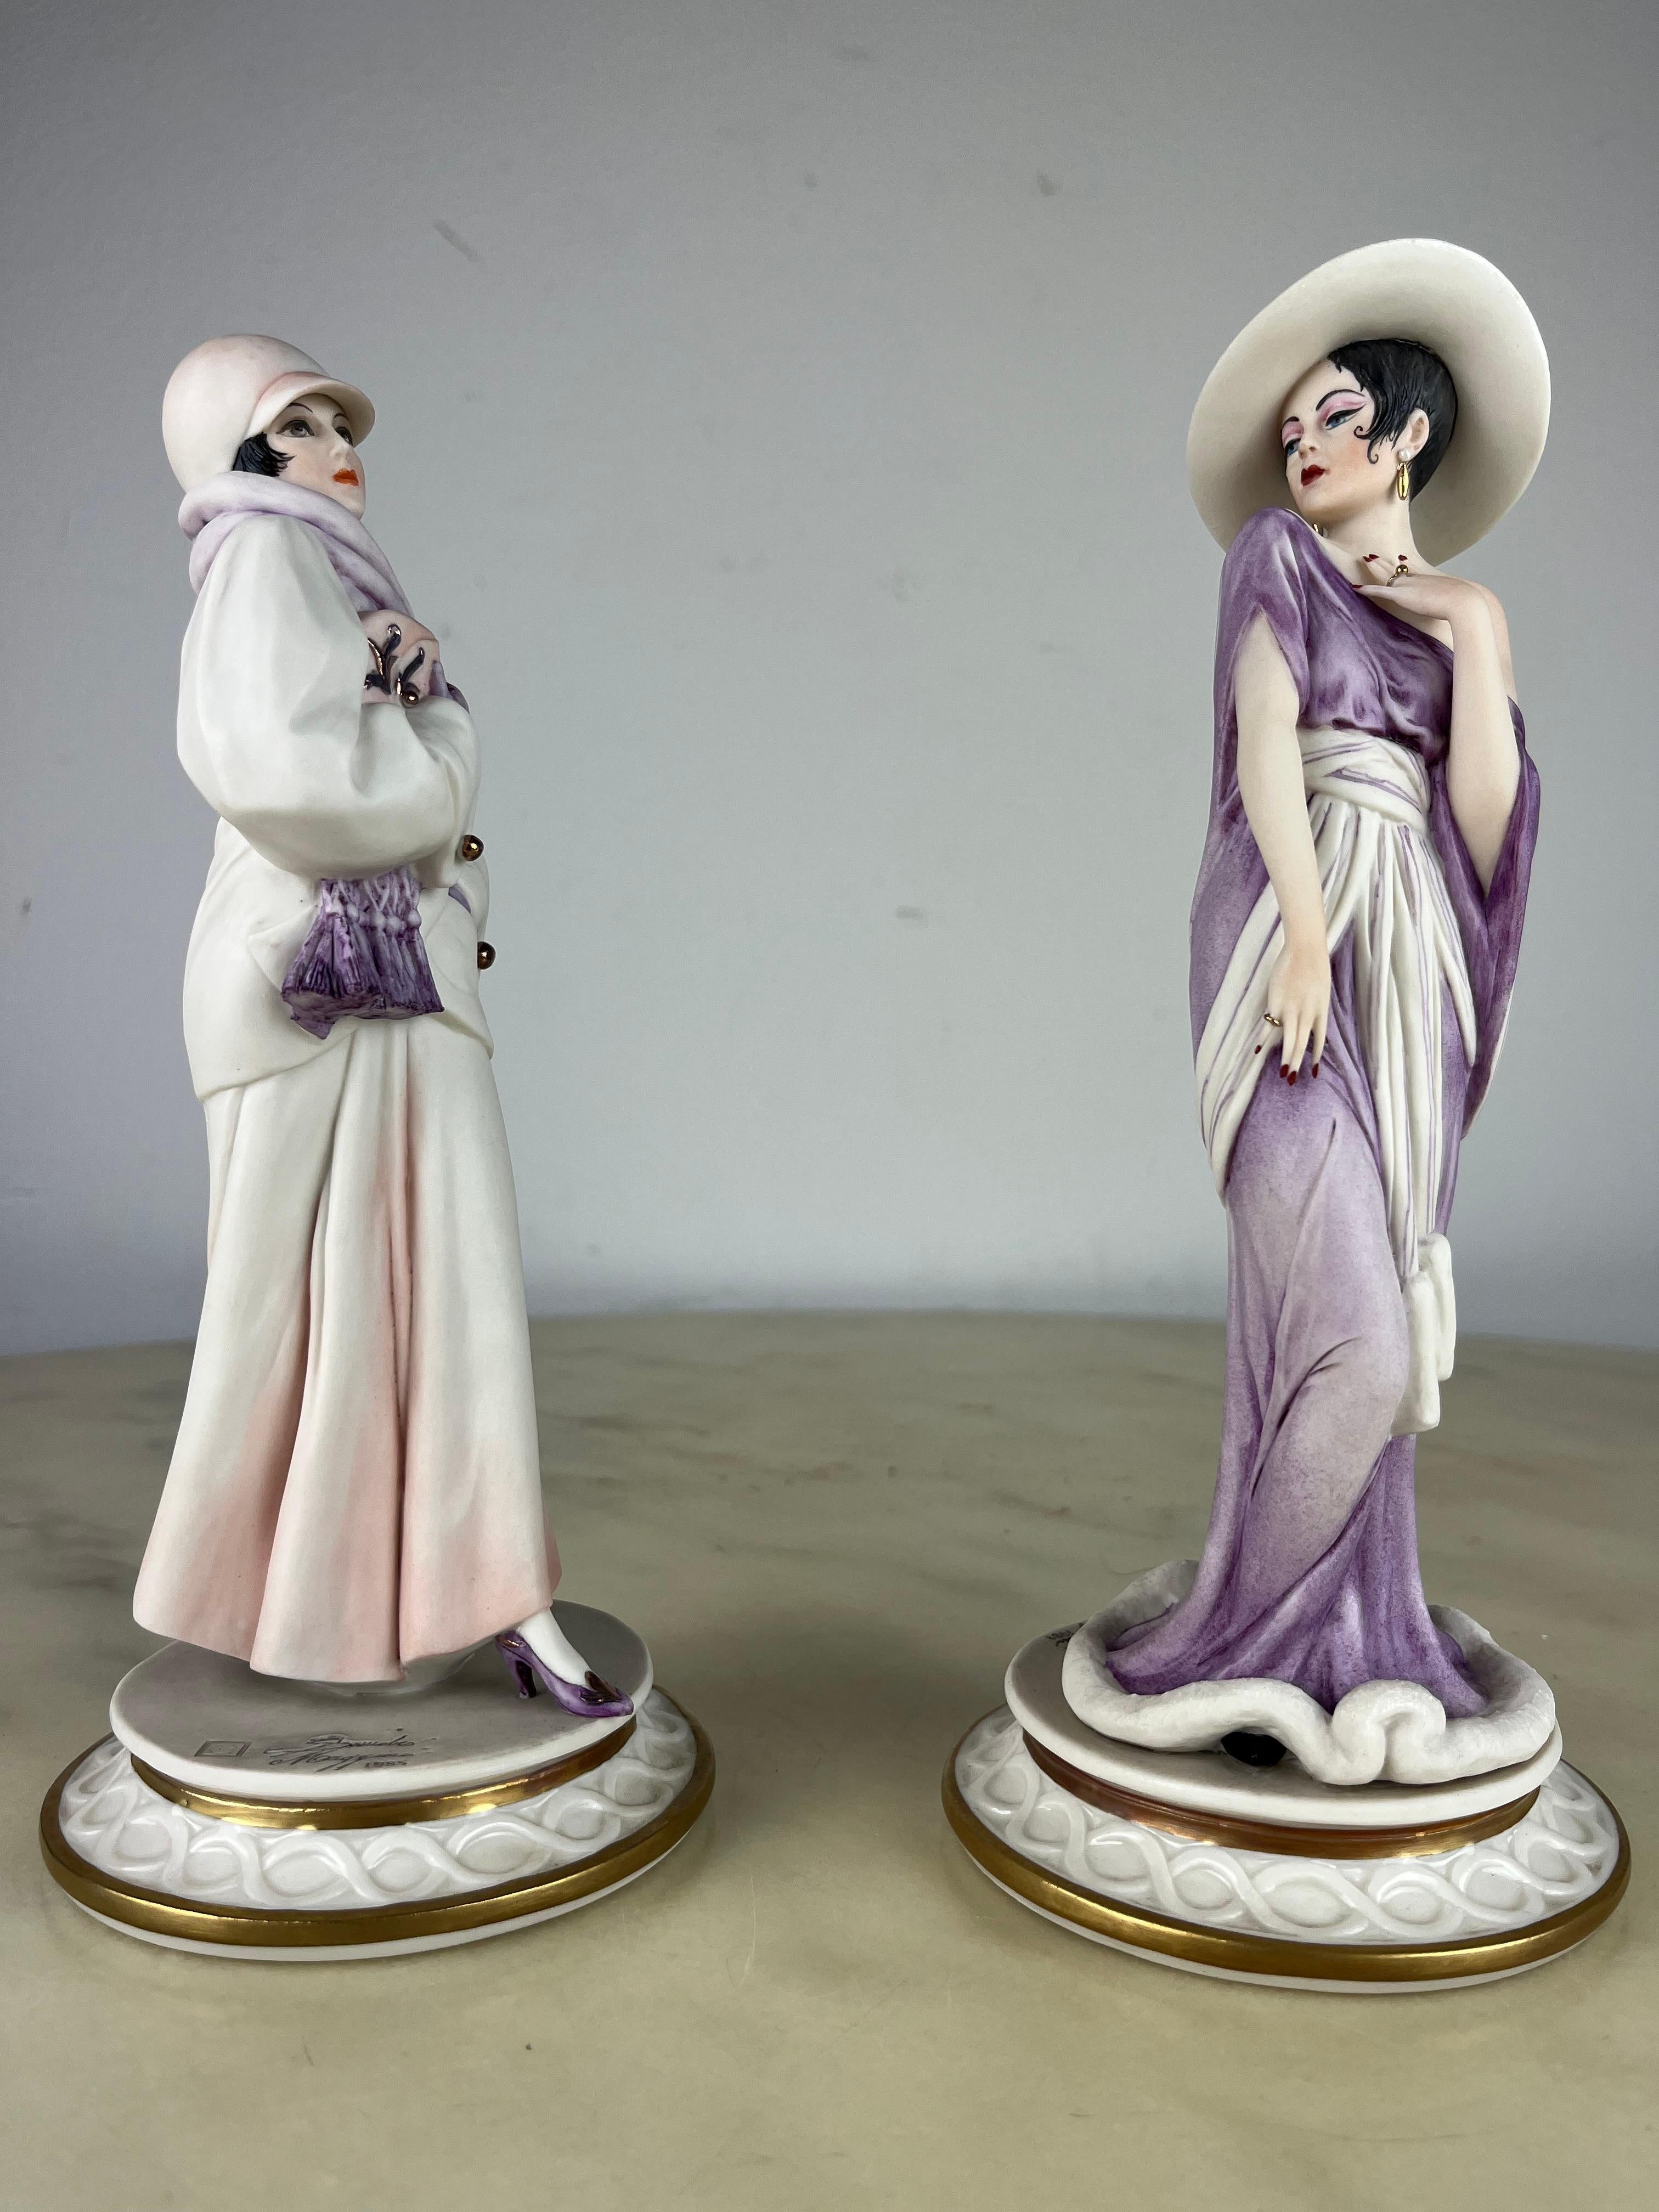 Set of 2 Capodimonte Figurines by Sandro Maggioni, Italy, 1980s In Excellent Condition For Sale In Palermo, IT